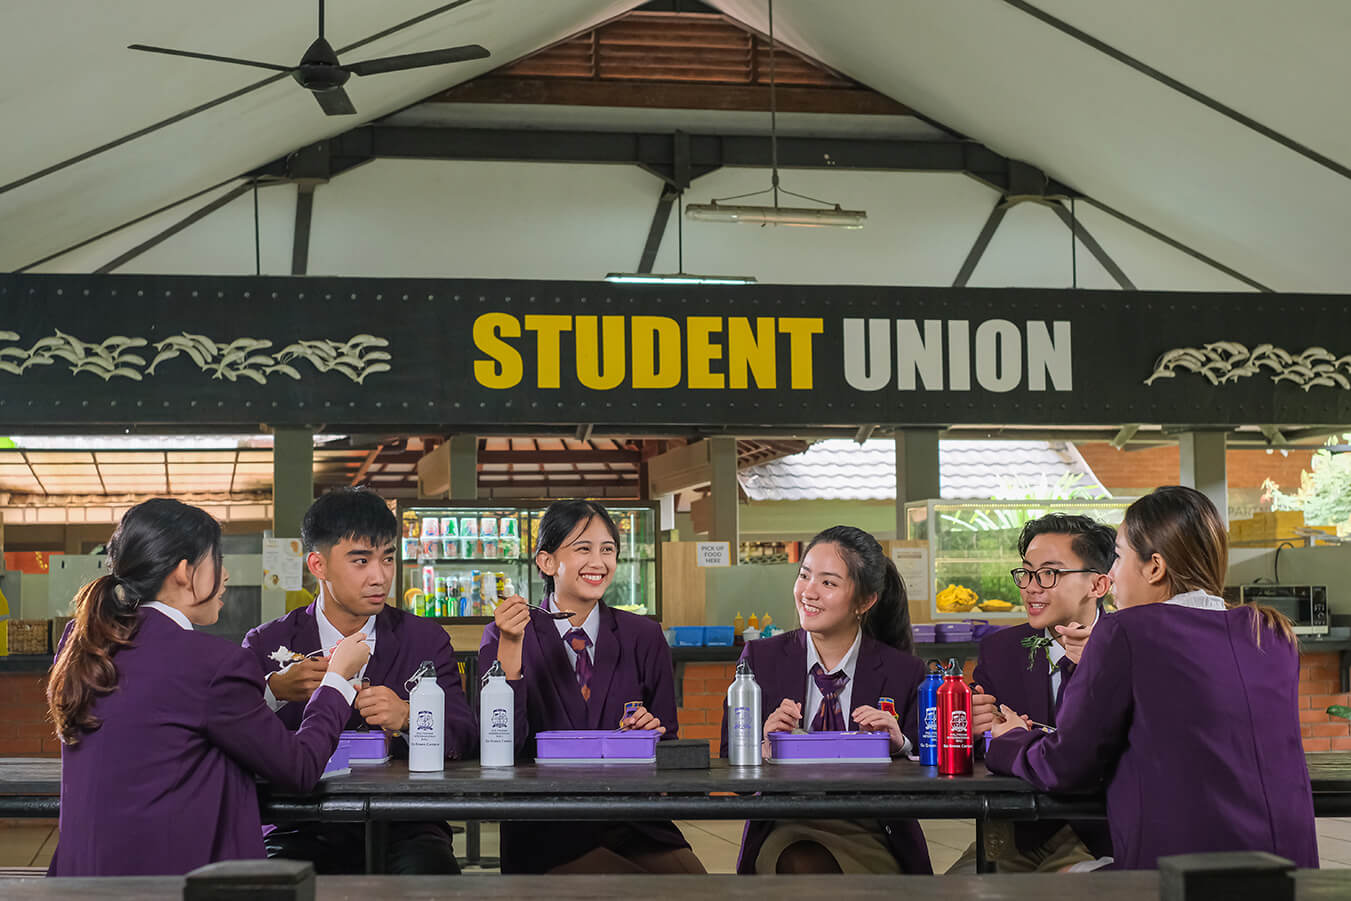 Student UnionCafeteria that offers a variety of healthy meals at affordable prices.